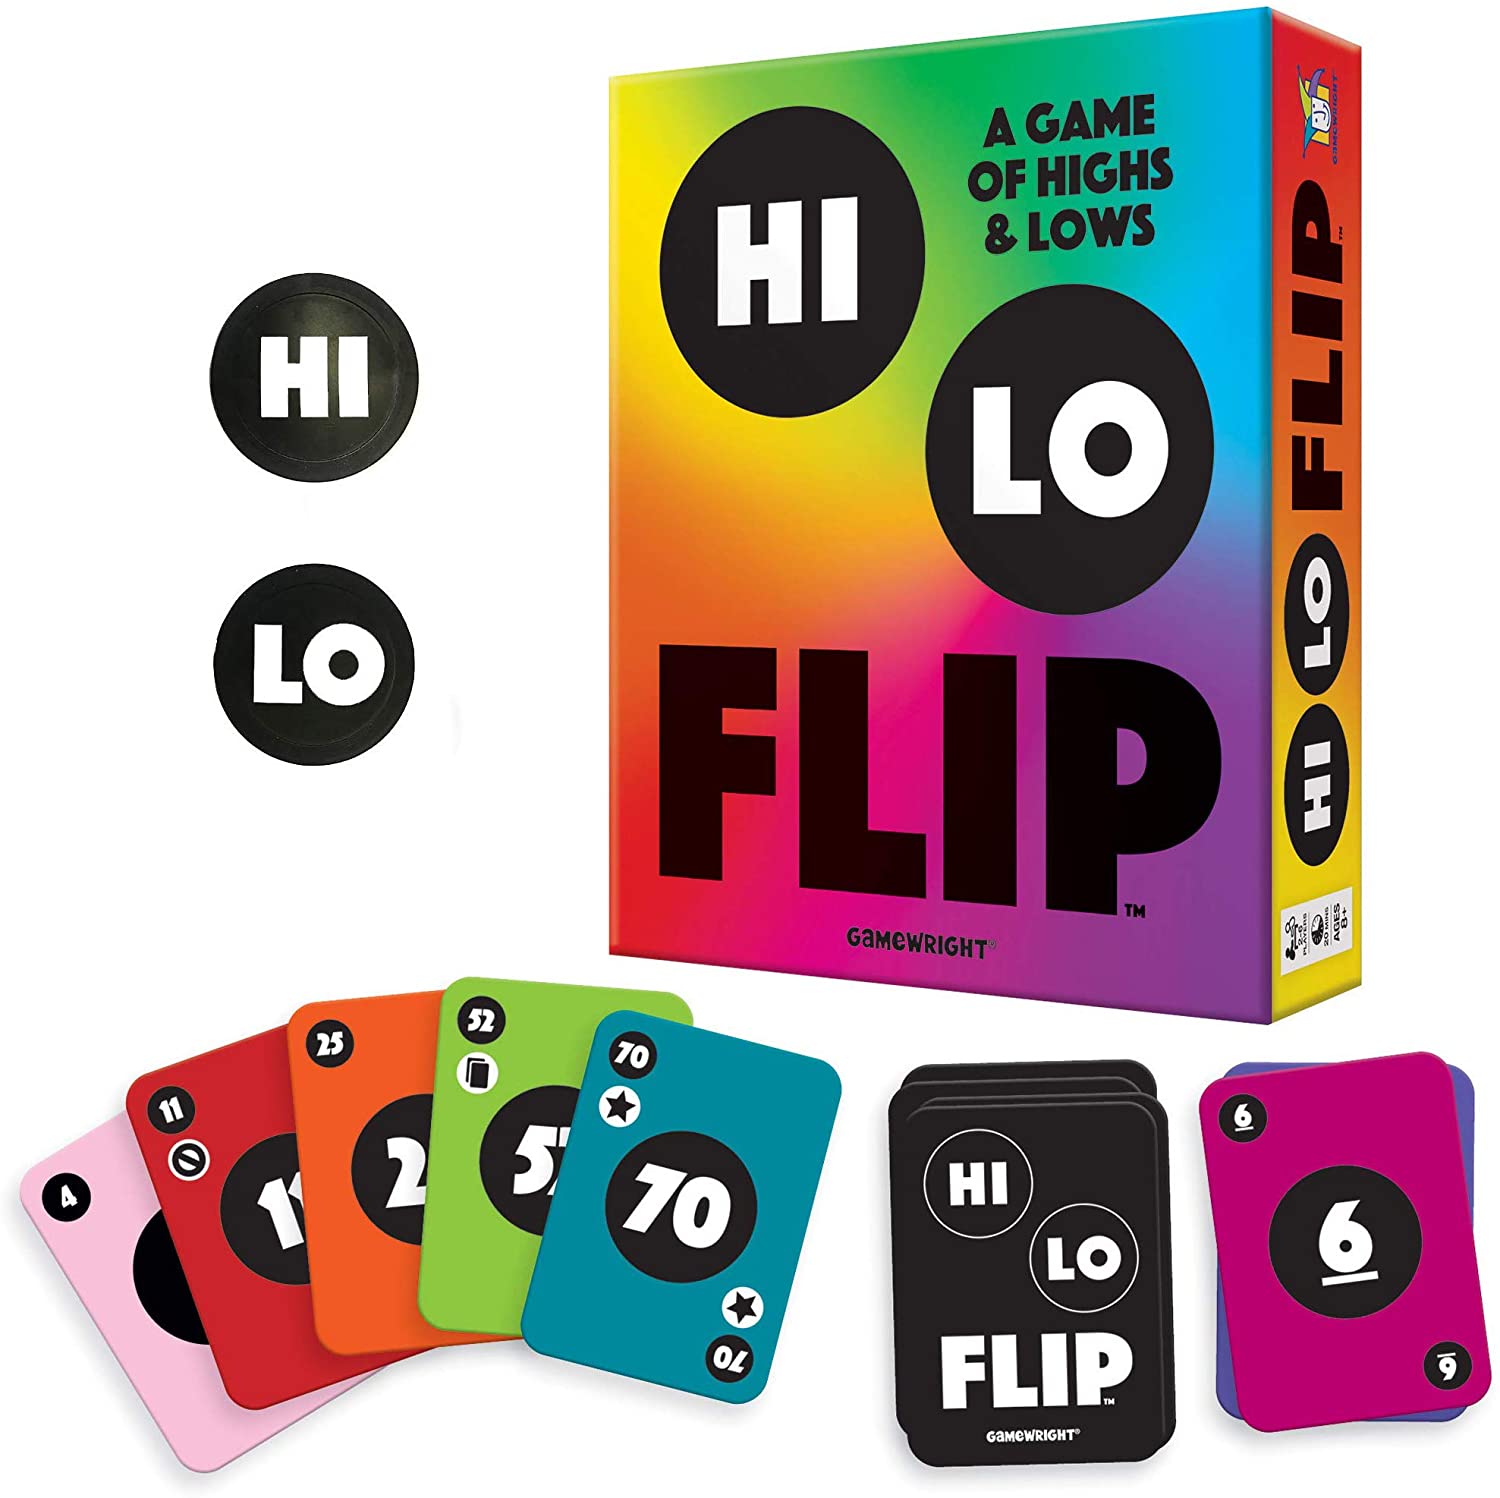 Hi Lo Flip A Card Game of Highs & Lows